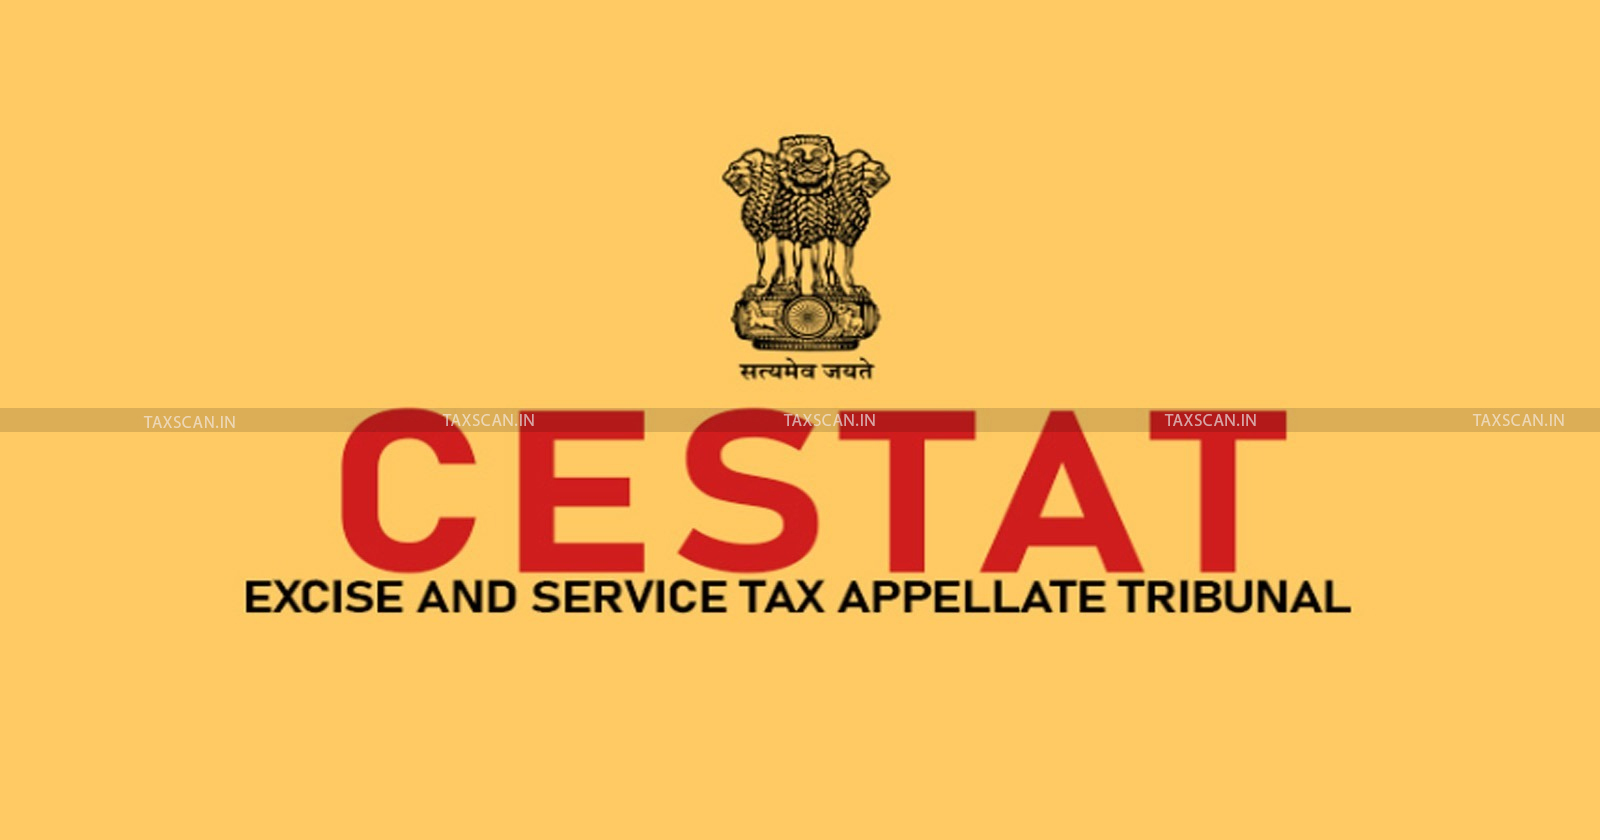 CESTAT - Customs Act - Customs - Excise - and Service Tax Appellate Tribunal - CESTAT chennai - taxscan